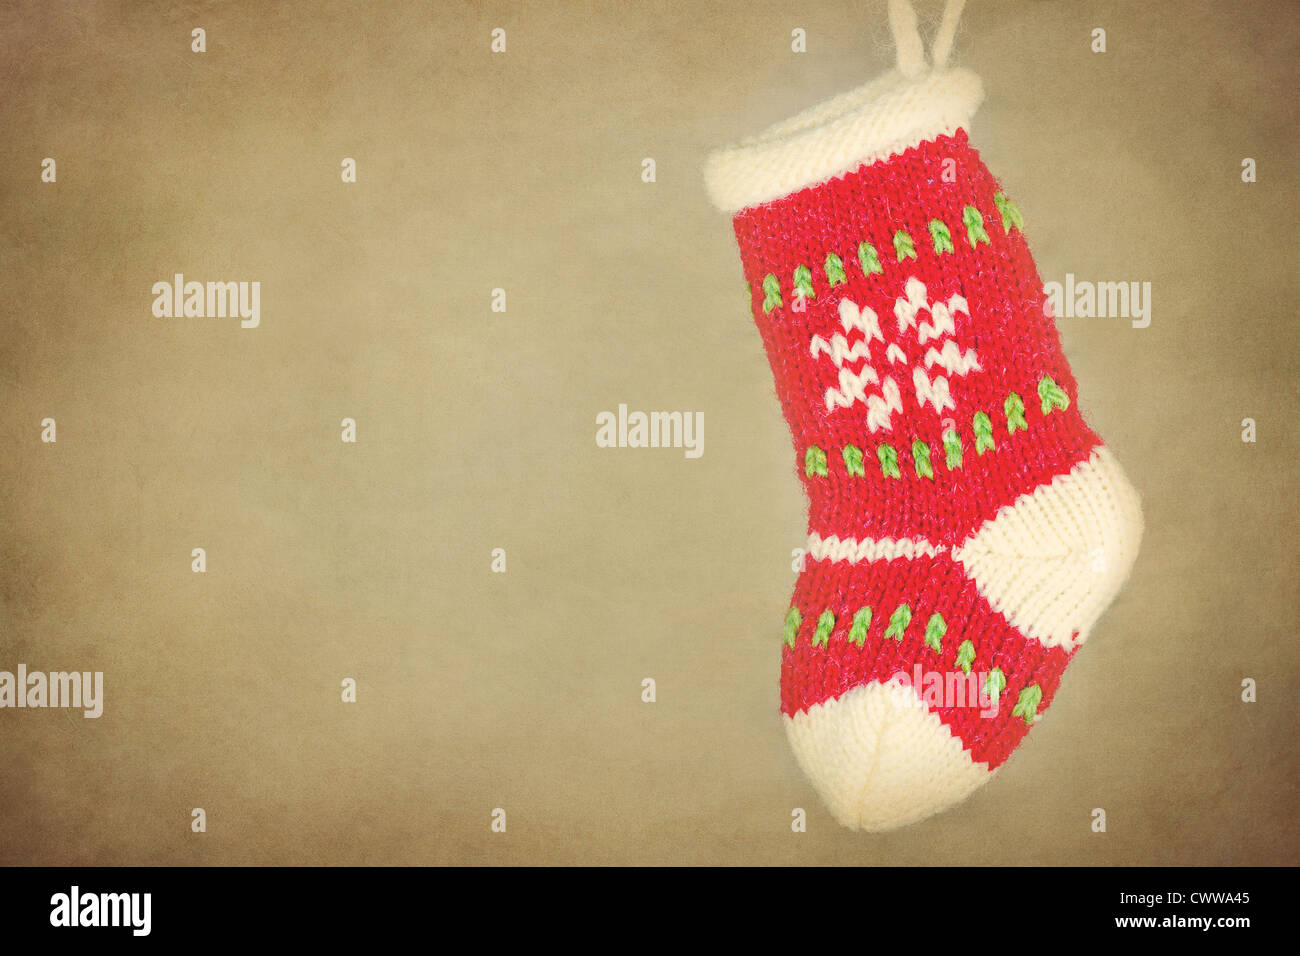 Cute knitted Christmas sock / stocking hanging on rustic vintage textured background Stock Photo